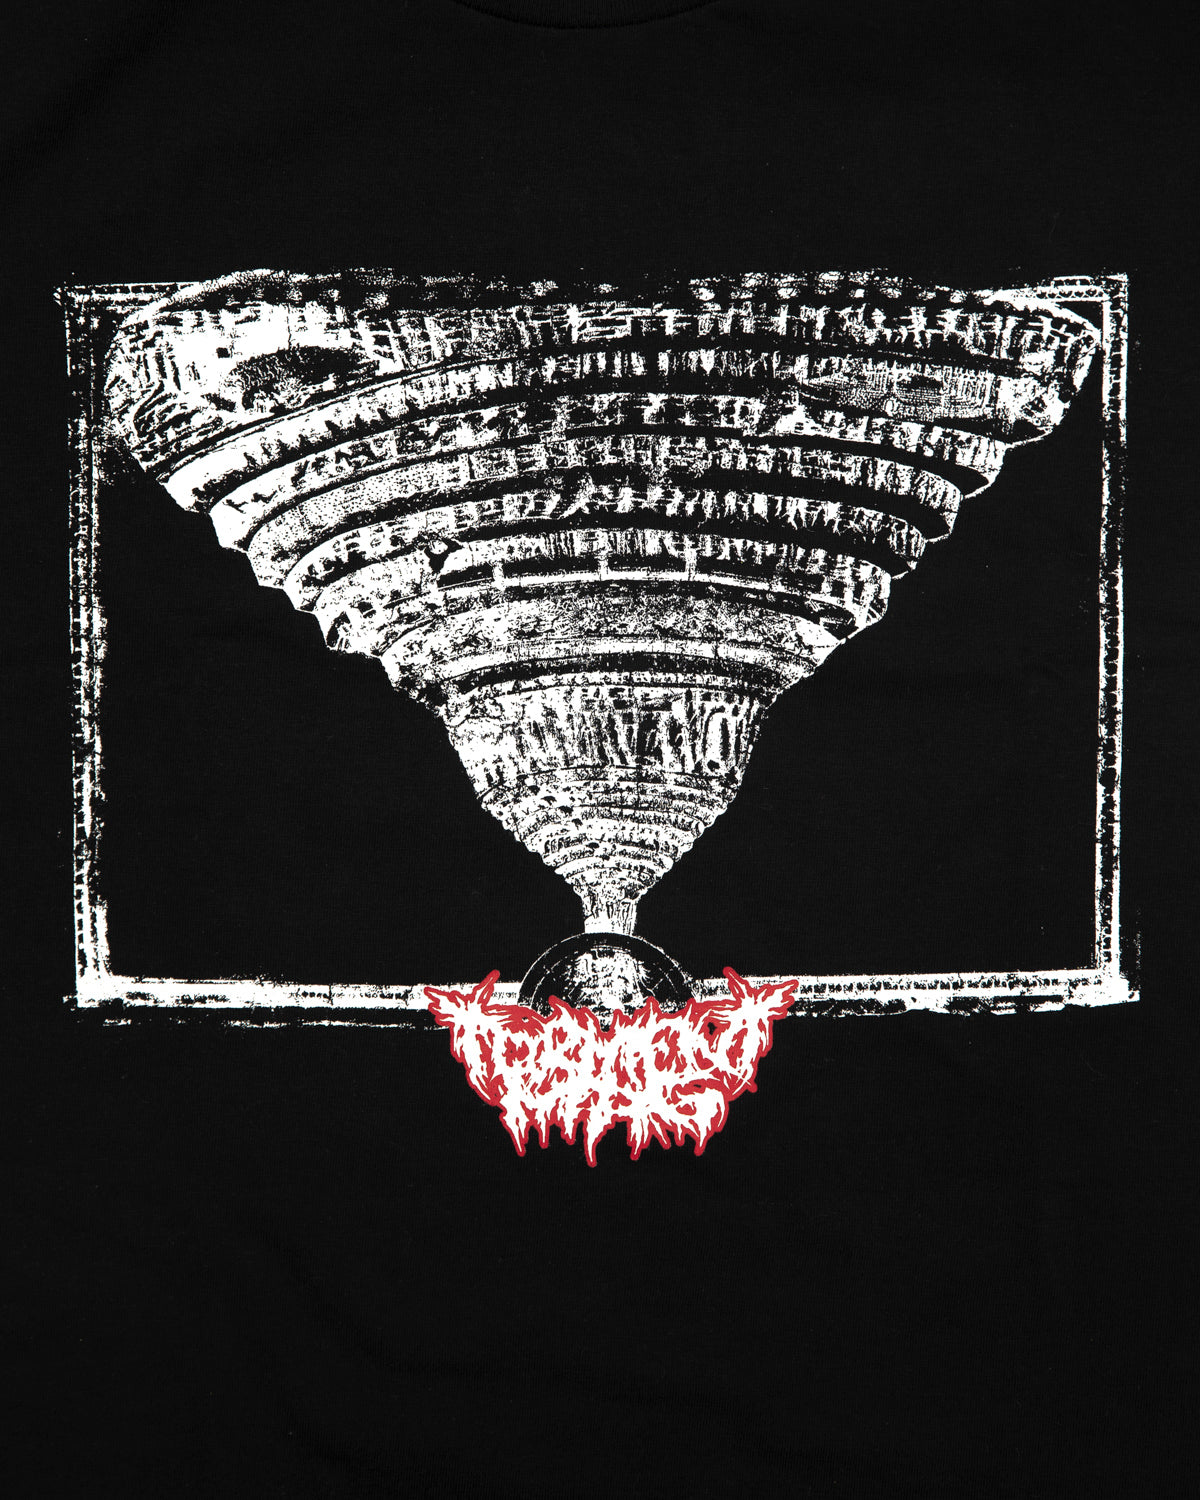 Dante's Inferno Shirt (9 Layers of Hell) – Torment Magazine Shop